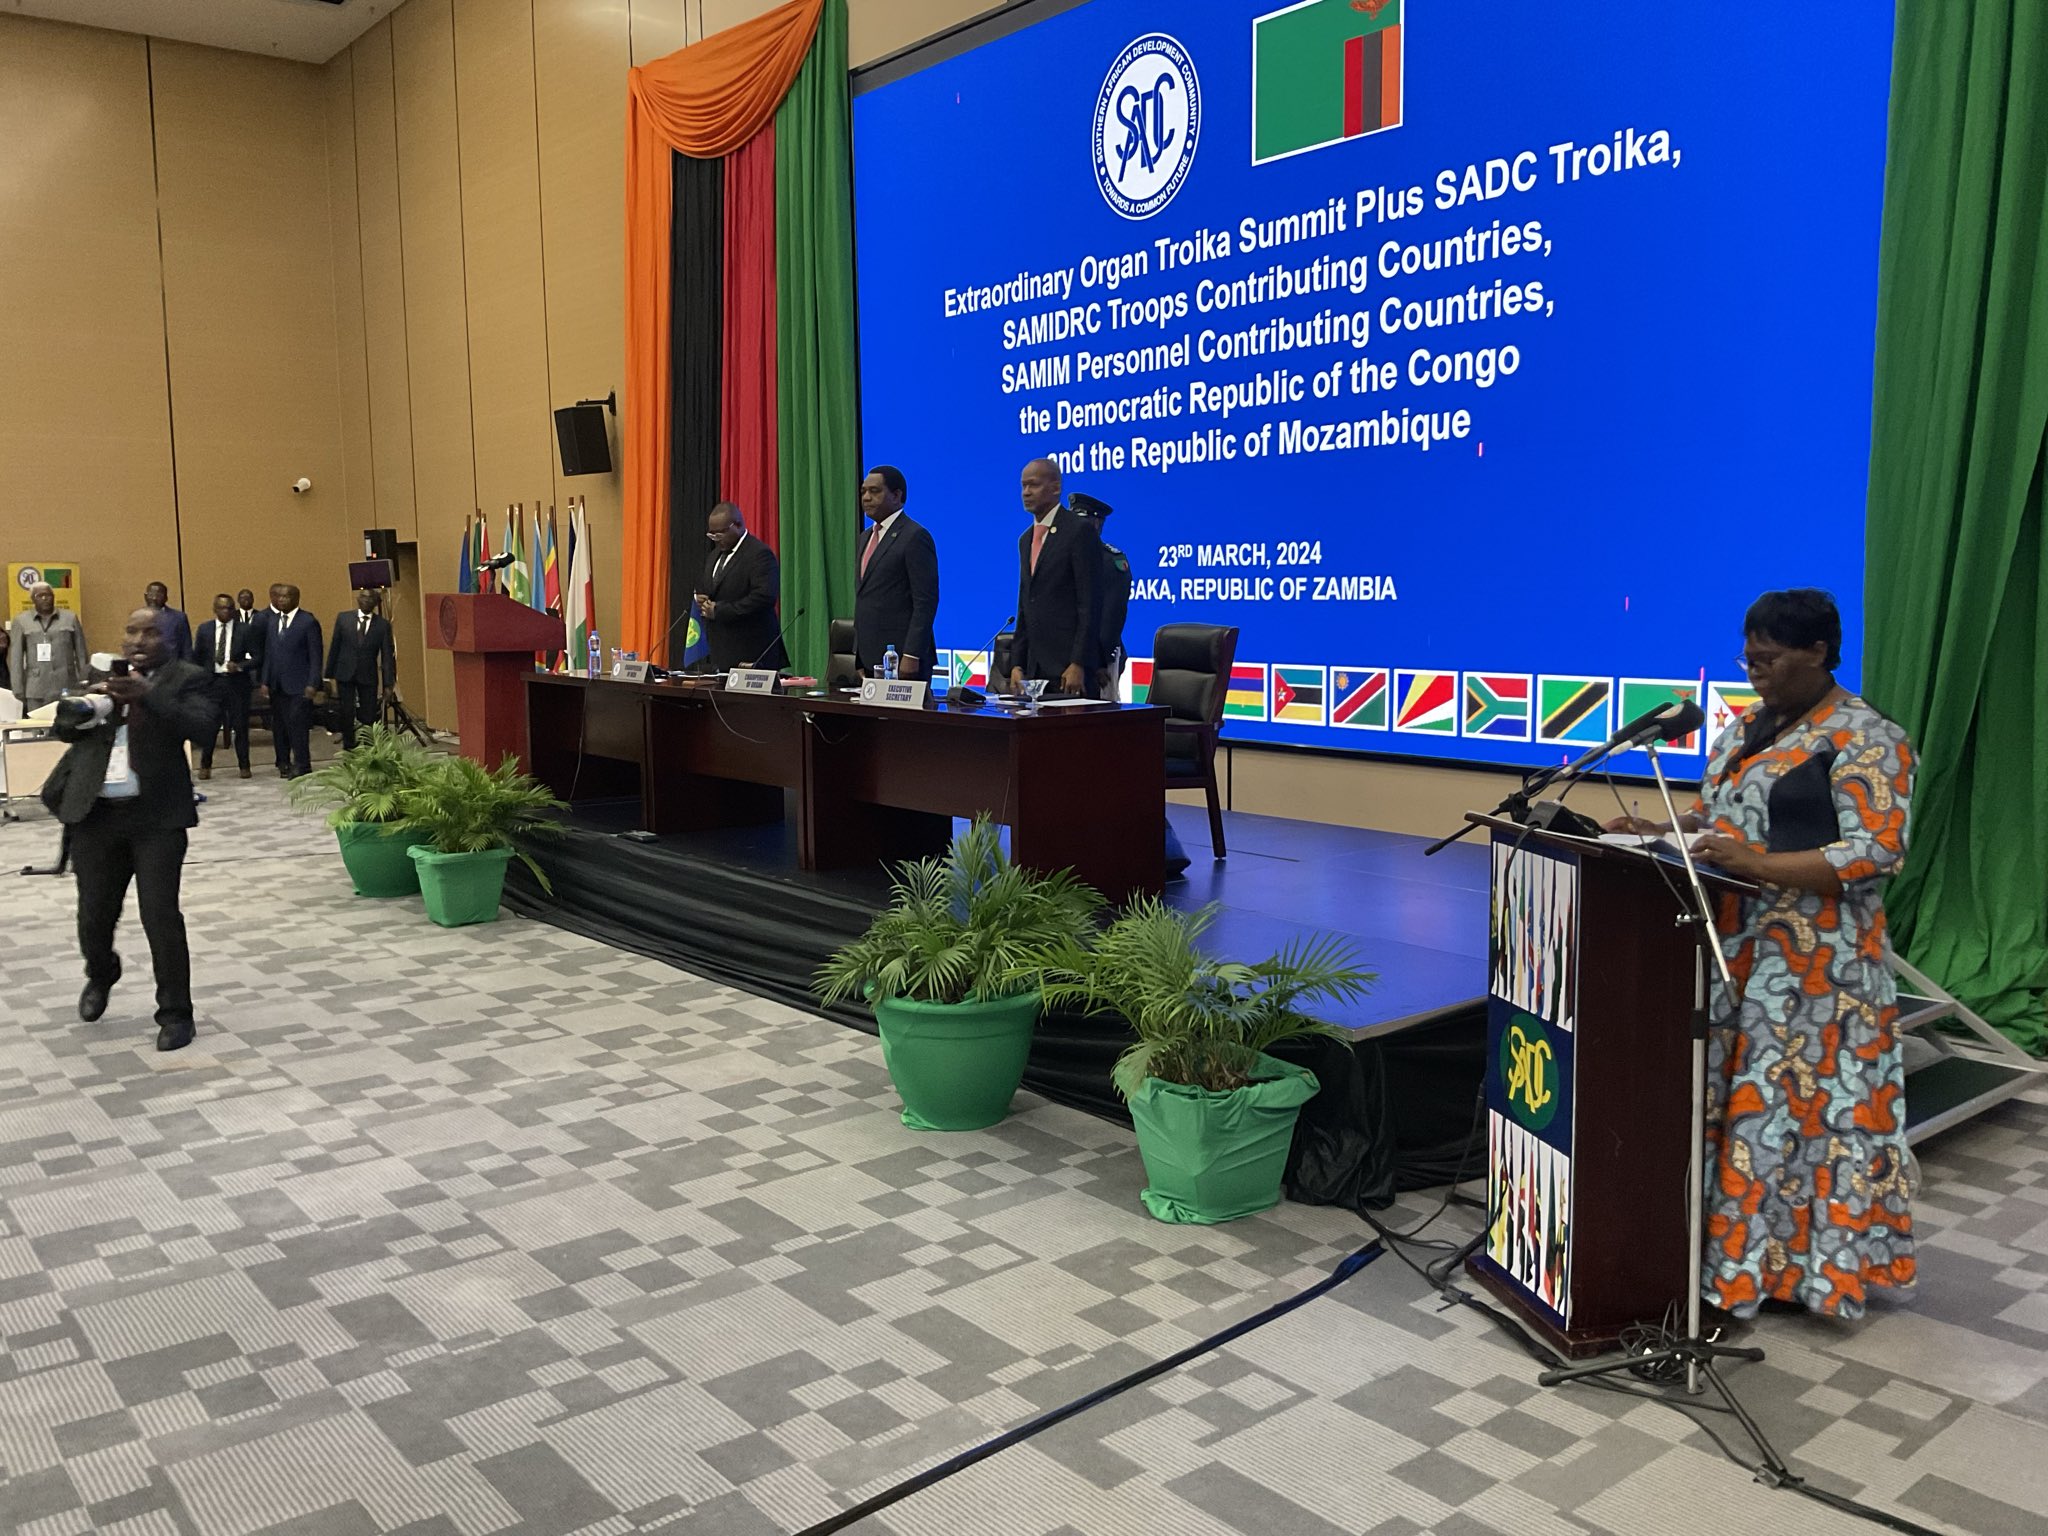 You are currently viewing SADC troika SUMMIT opens in Lusaka, as President Hichilema calls for regional peace